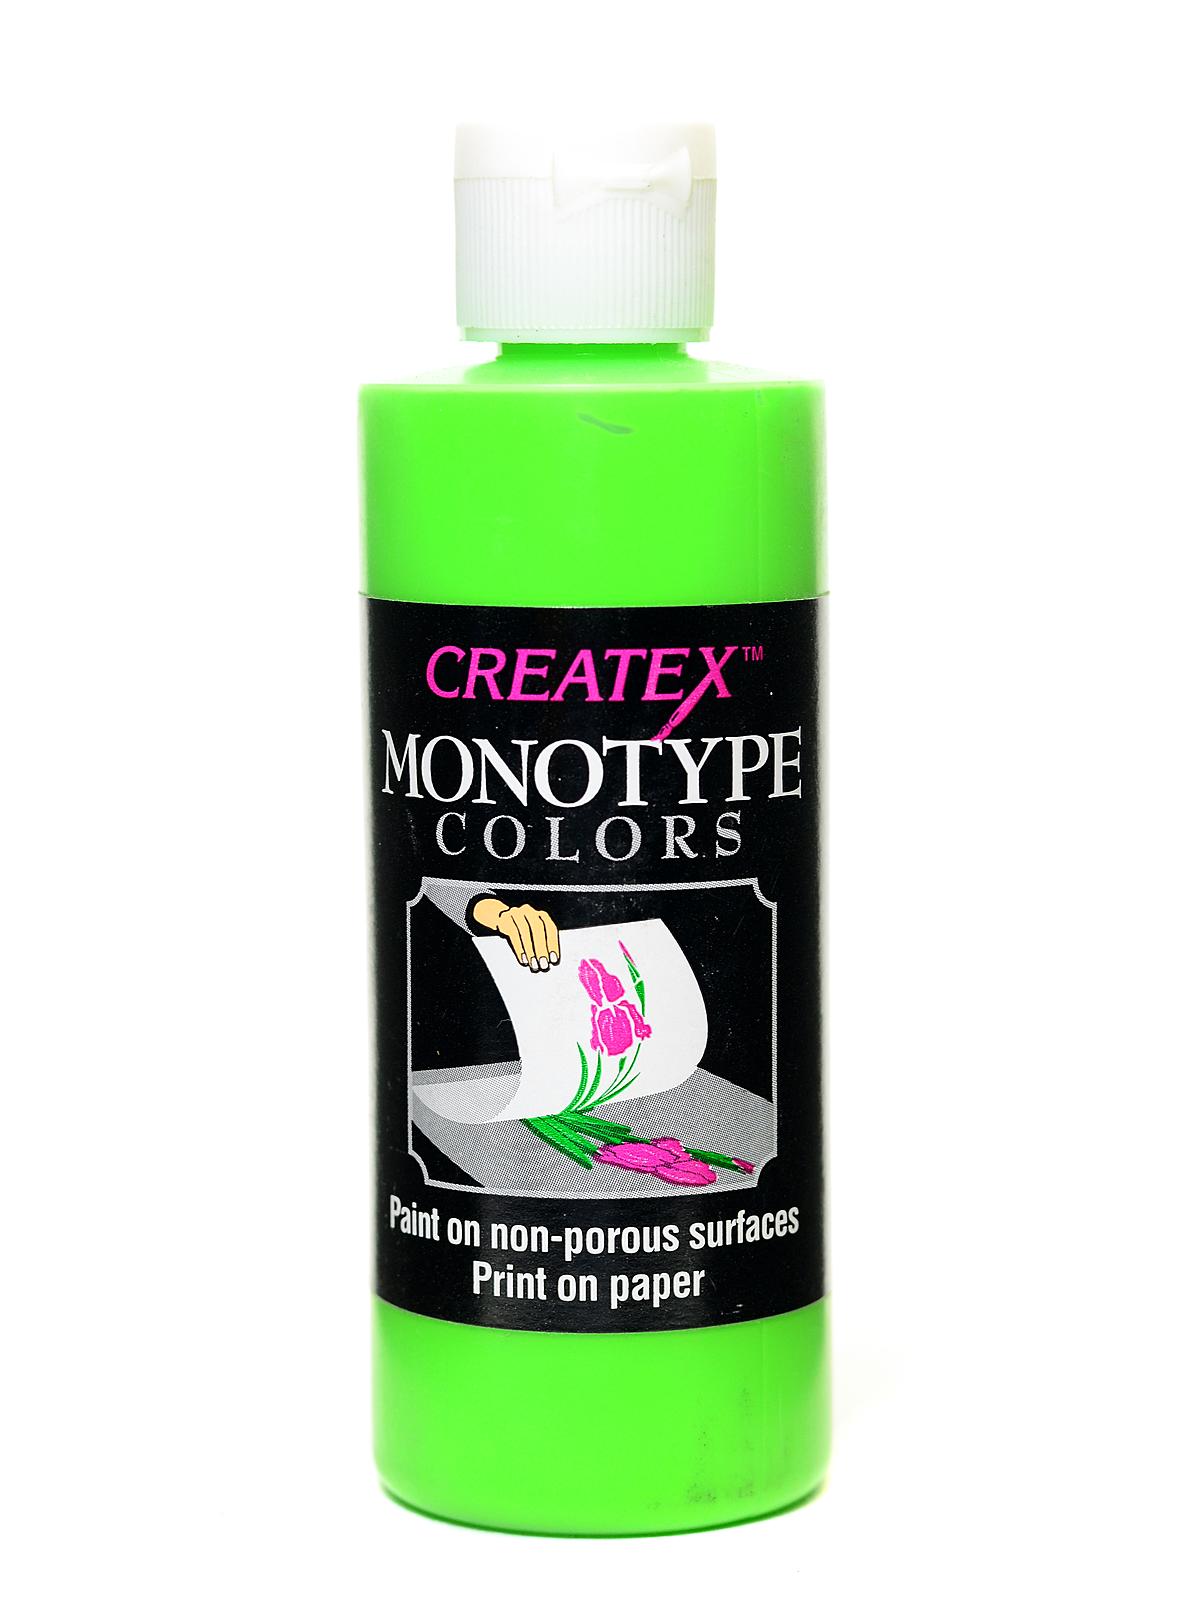 Monotype Colors Leaf Green 4 Oz.